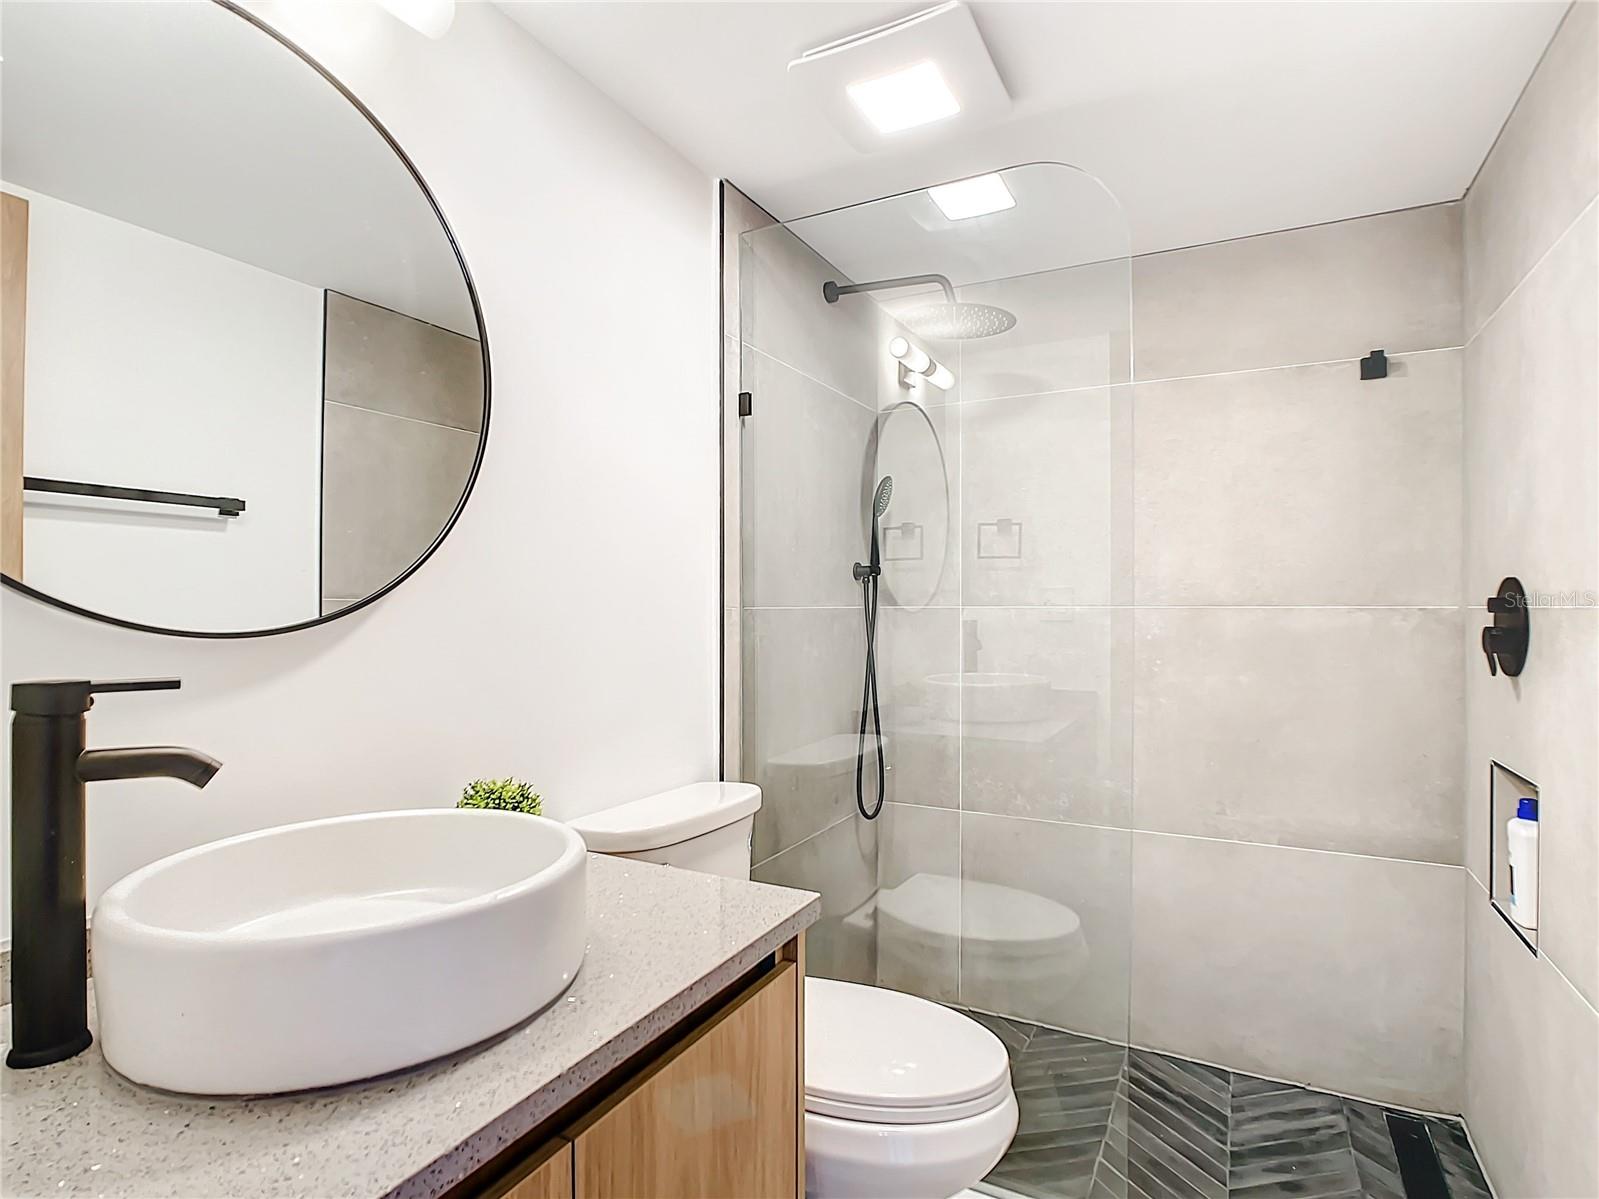 Secondary Bathroom with beautiful tile work and Glass shower 5532 PUERTA DEL SOL BLVD S, #136, ST PETERSBURG, FL 33715